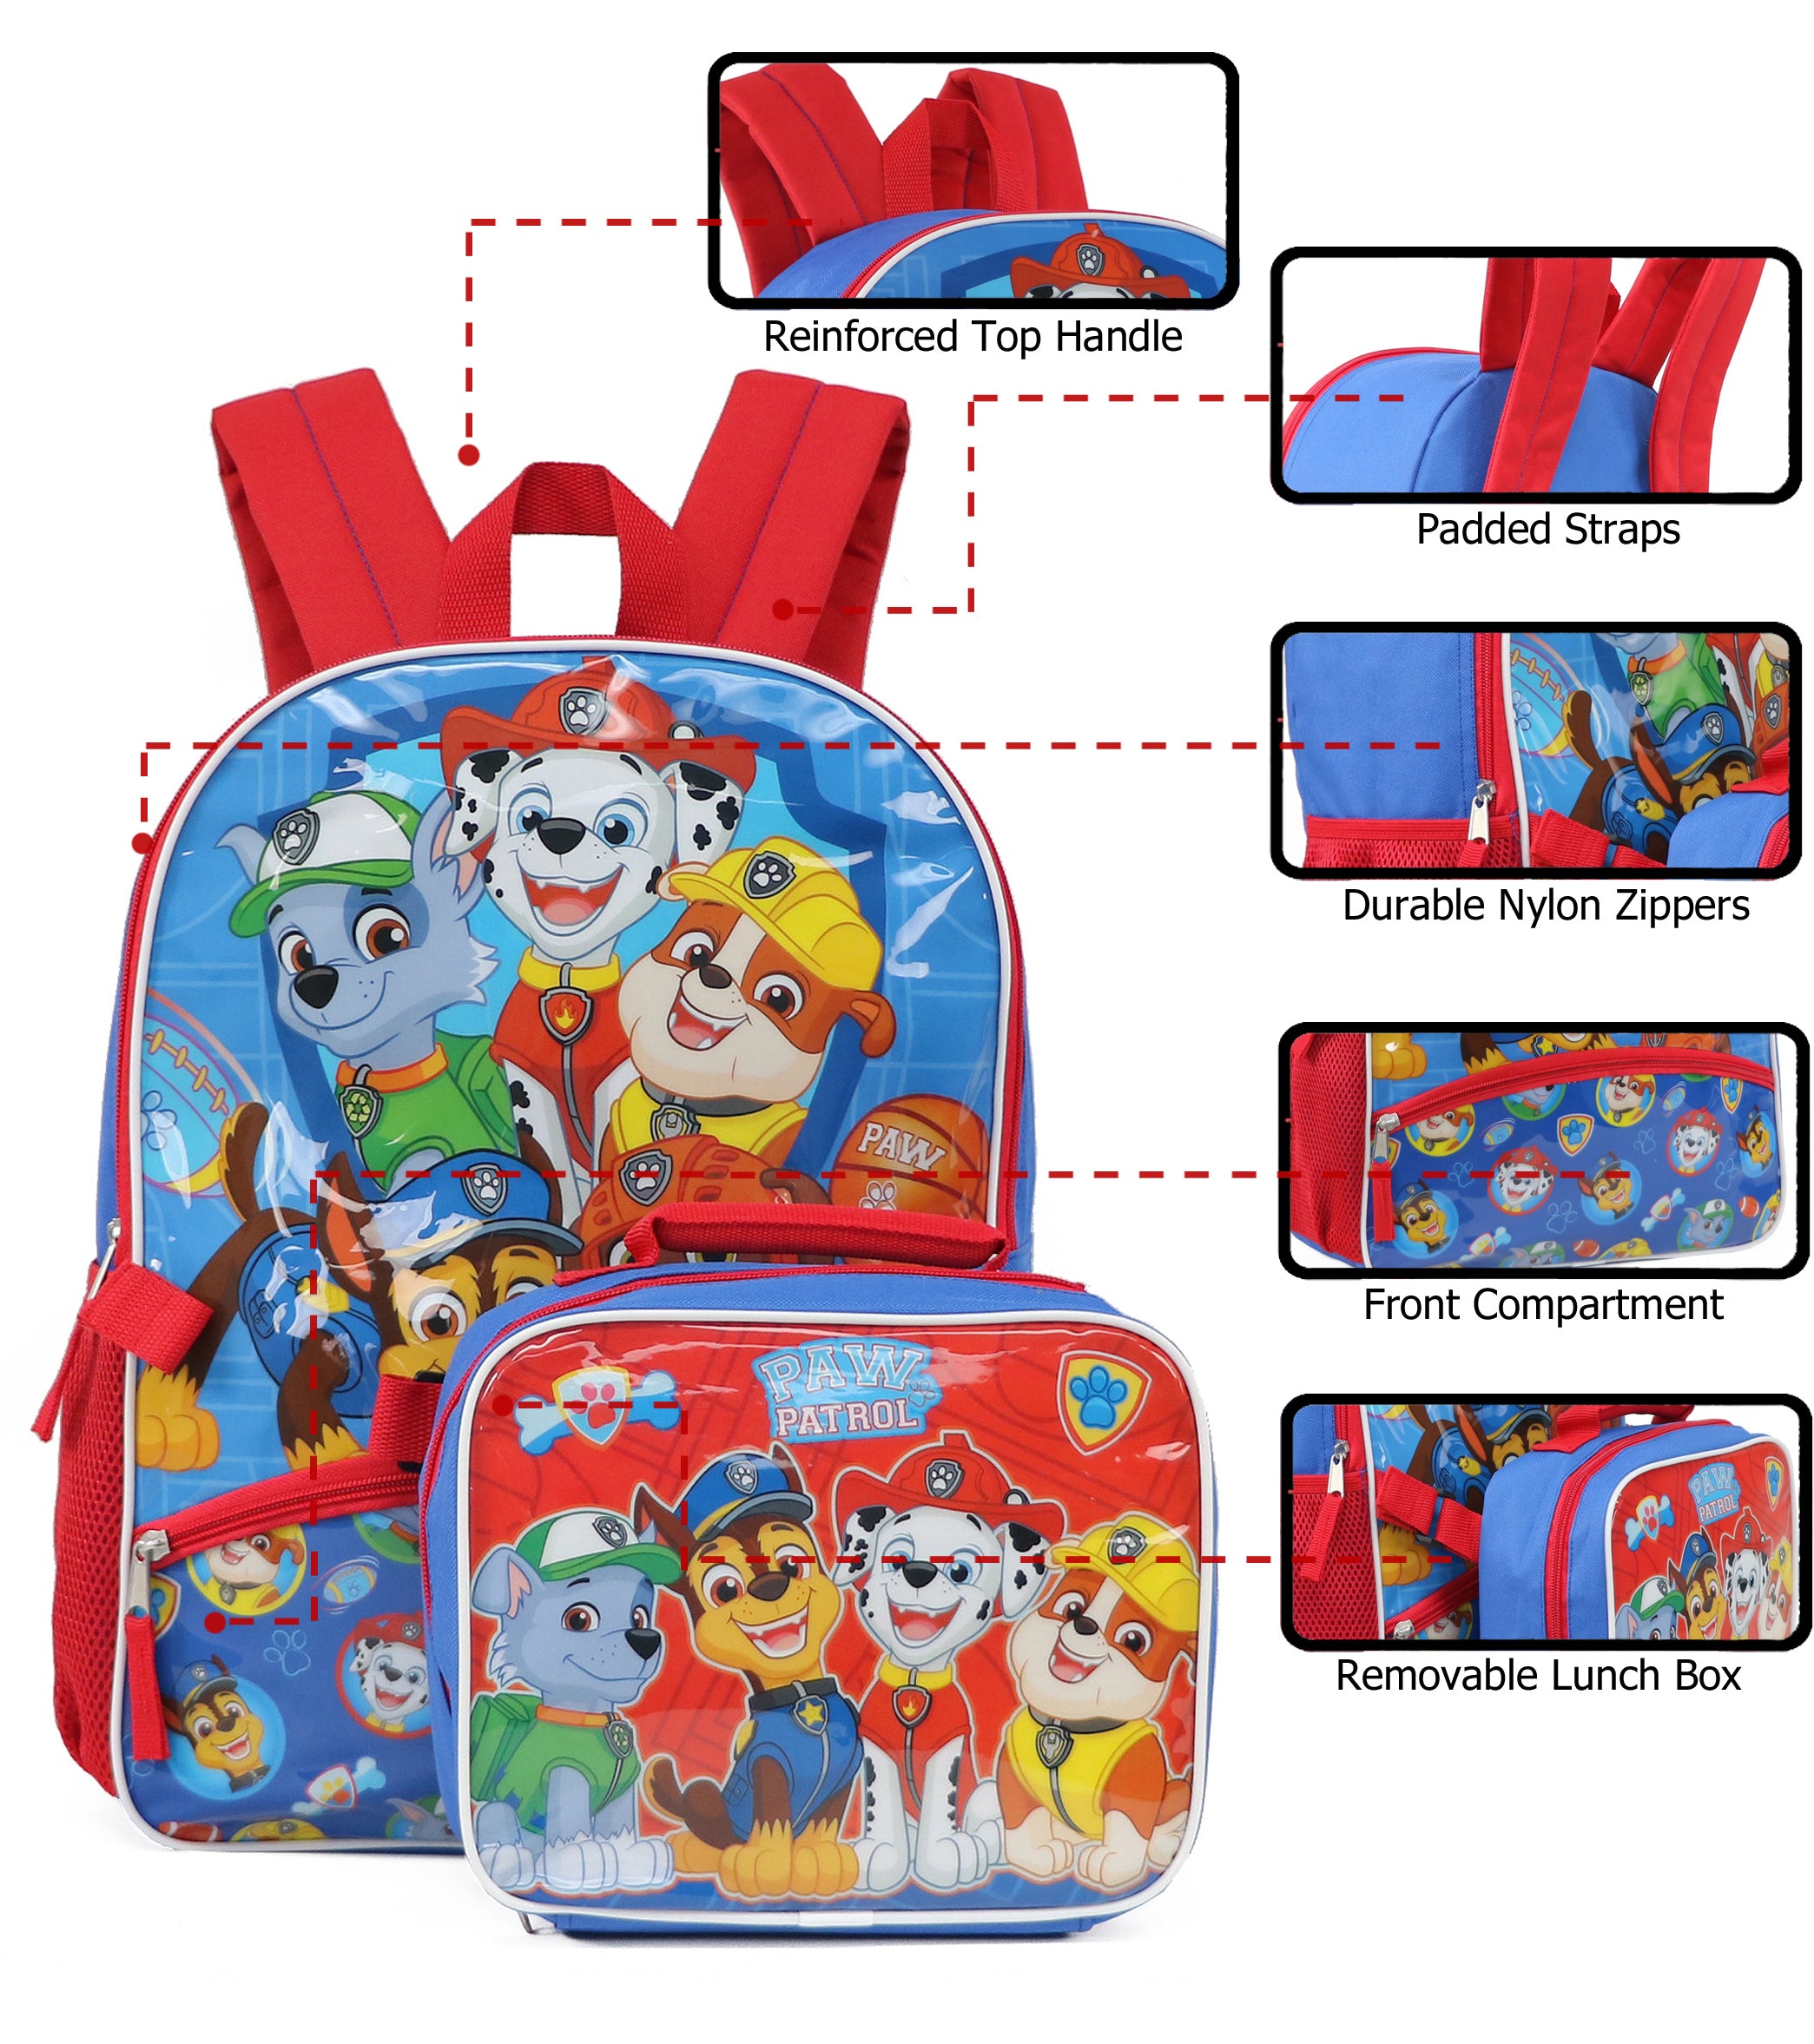 Nick Shop Paw Patrol Backpack and Lunch Bag Set for Boys, Girls - Bundle  with Paw Patrol Backpack and Insulated Lunch Box Plus Activity Book,  Stickers